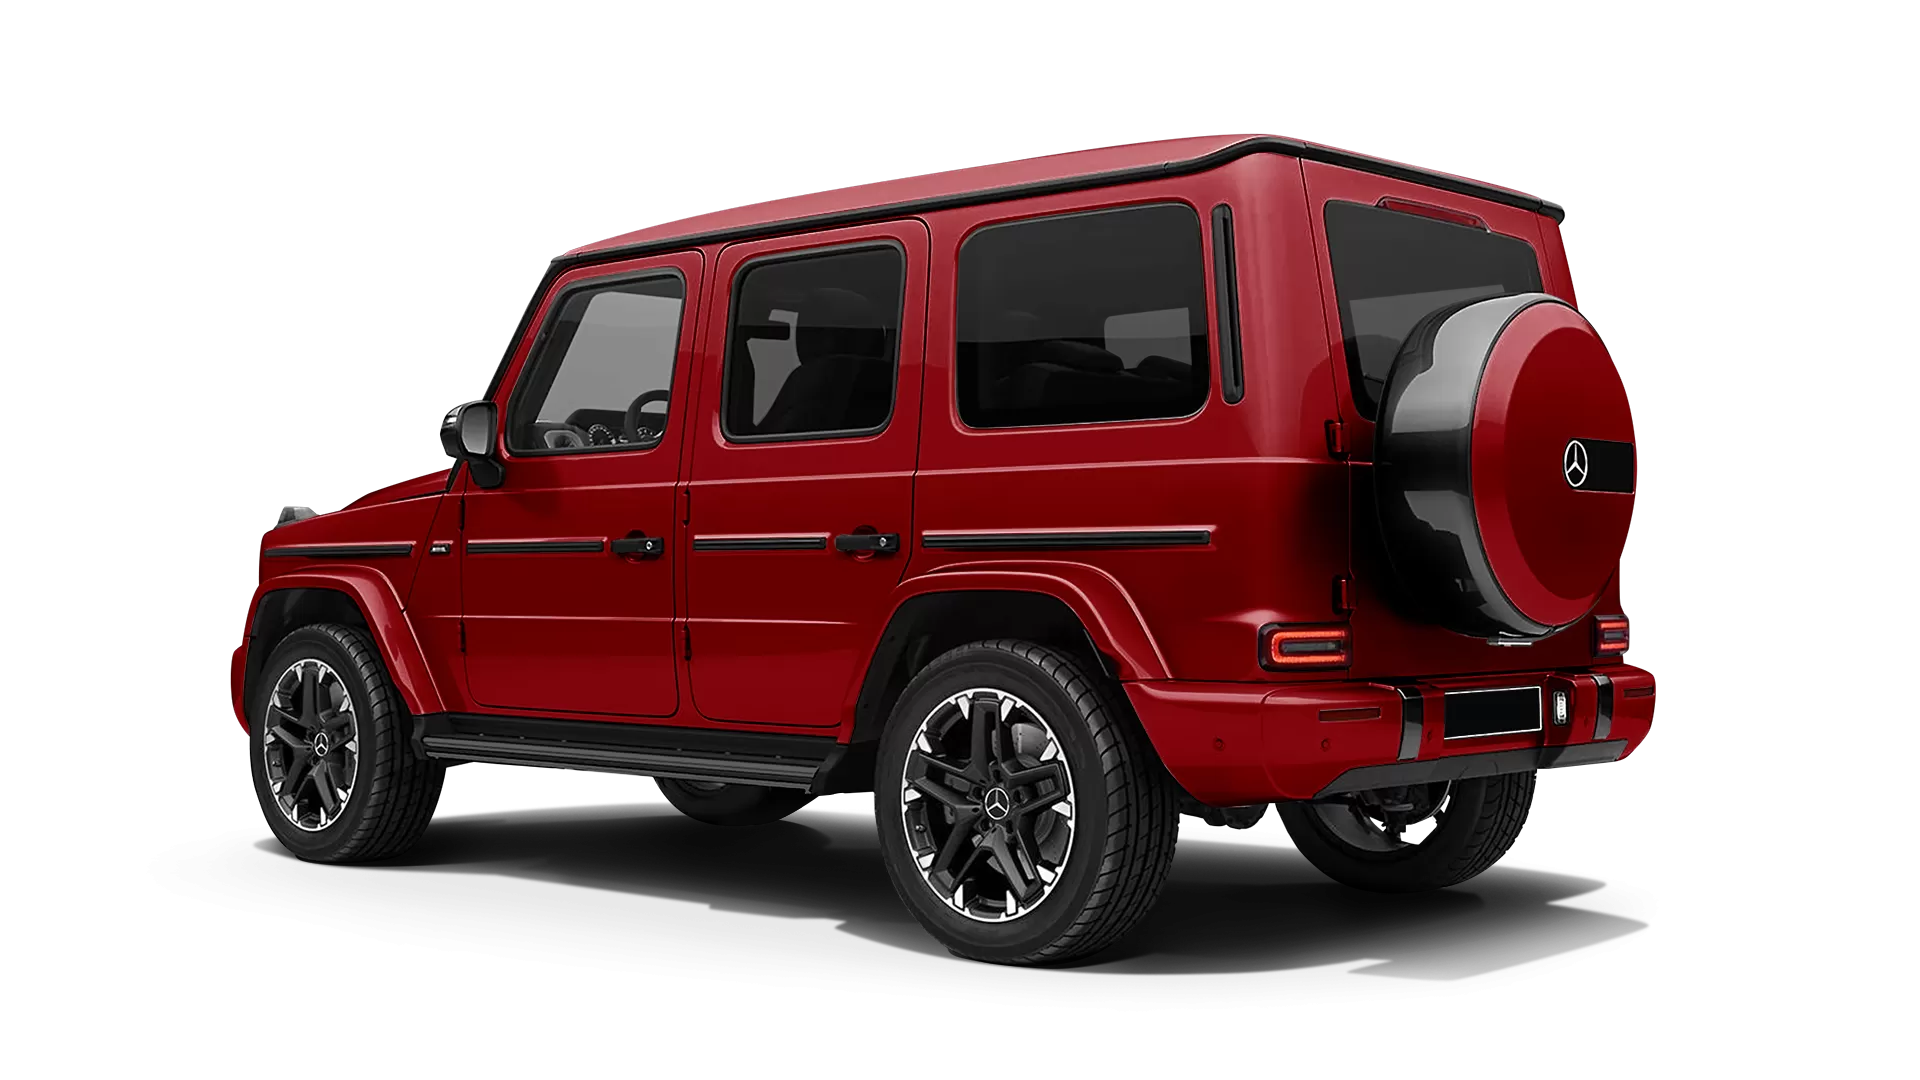 Mercedes G class W463 stock rear view in Jupiter Red color